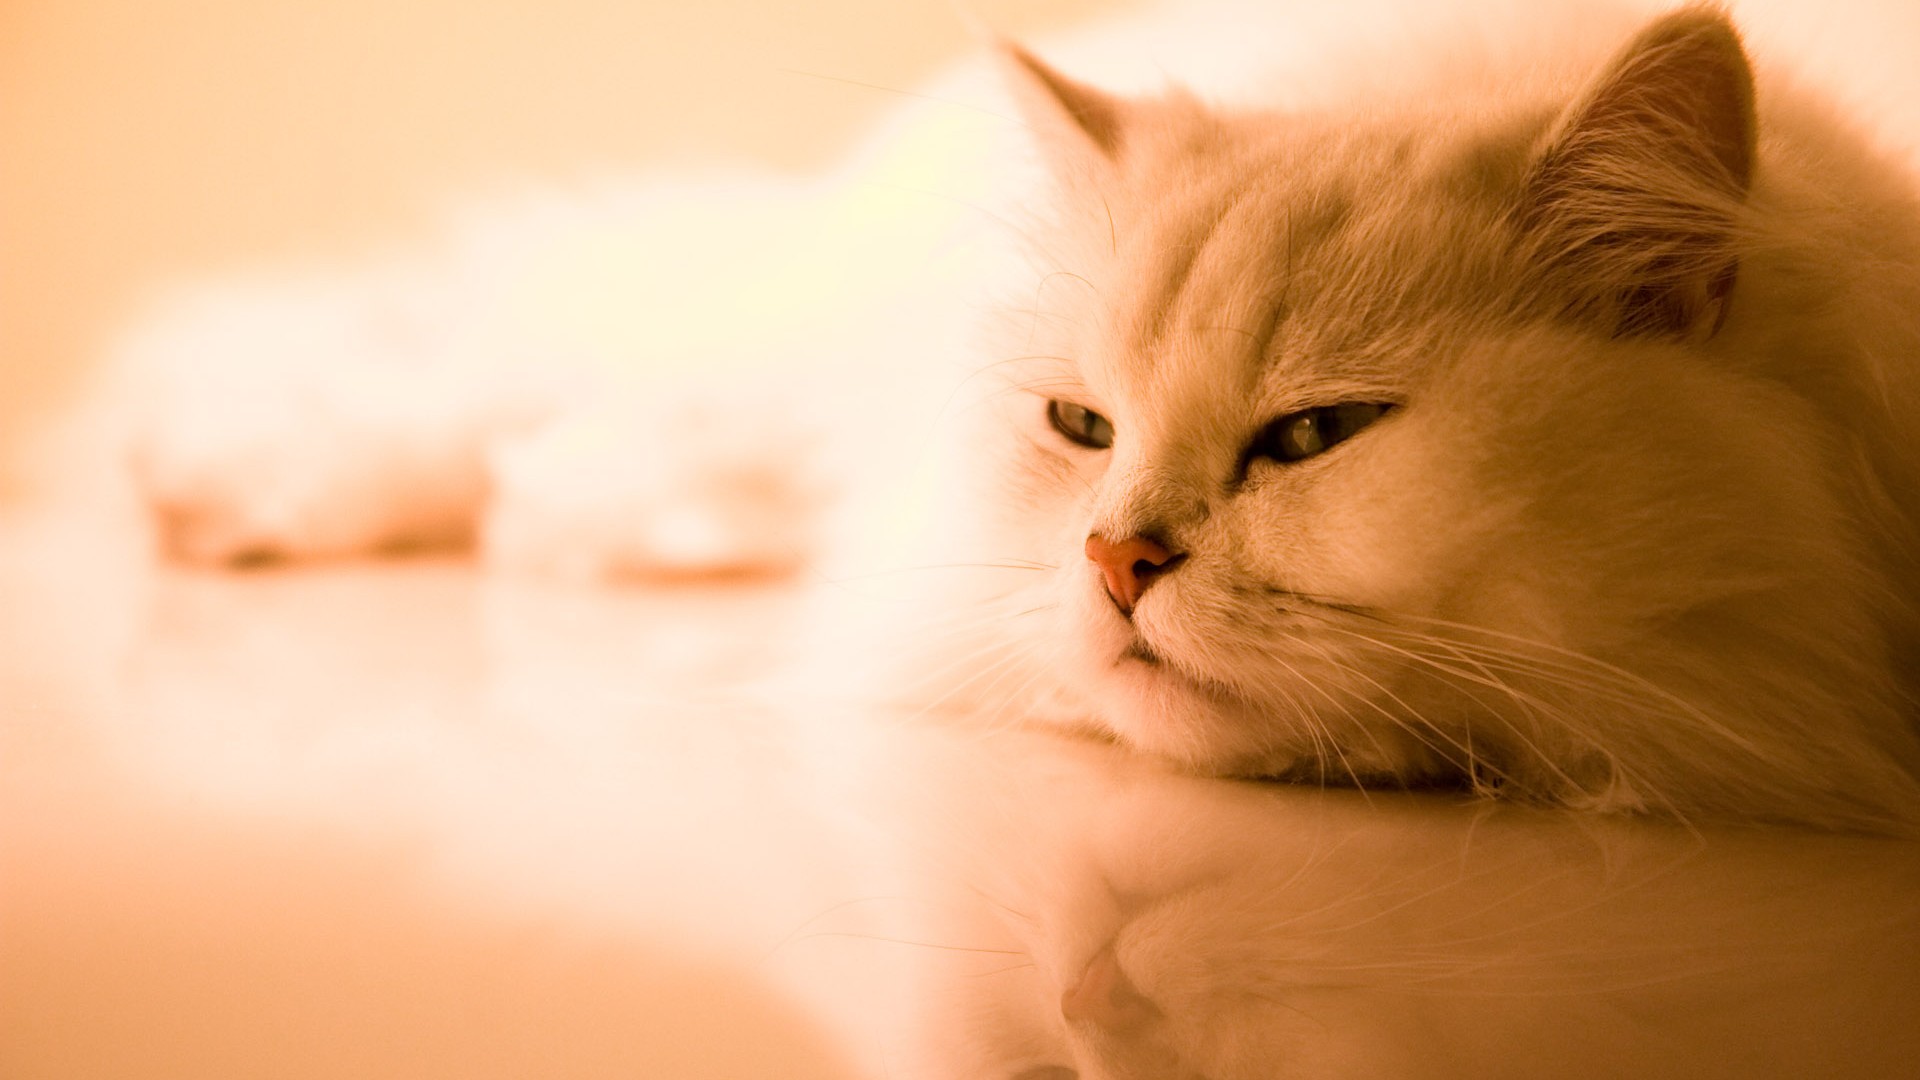 Cat photo HD Wallpapers #35 - 1920x1080